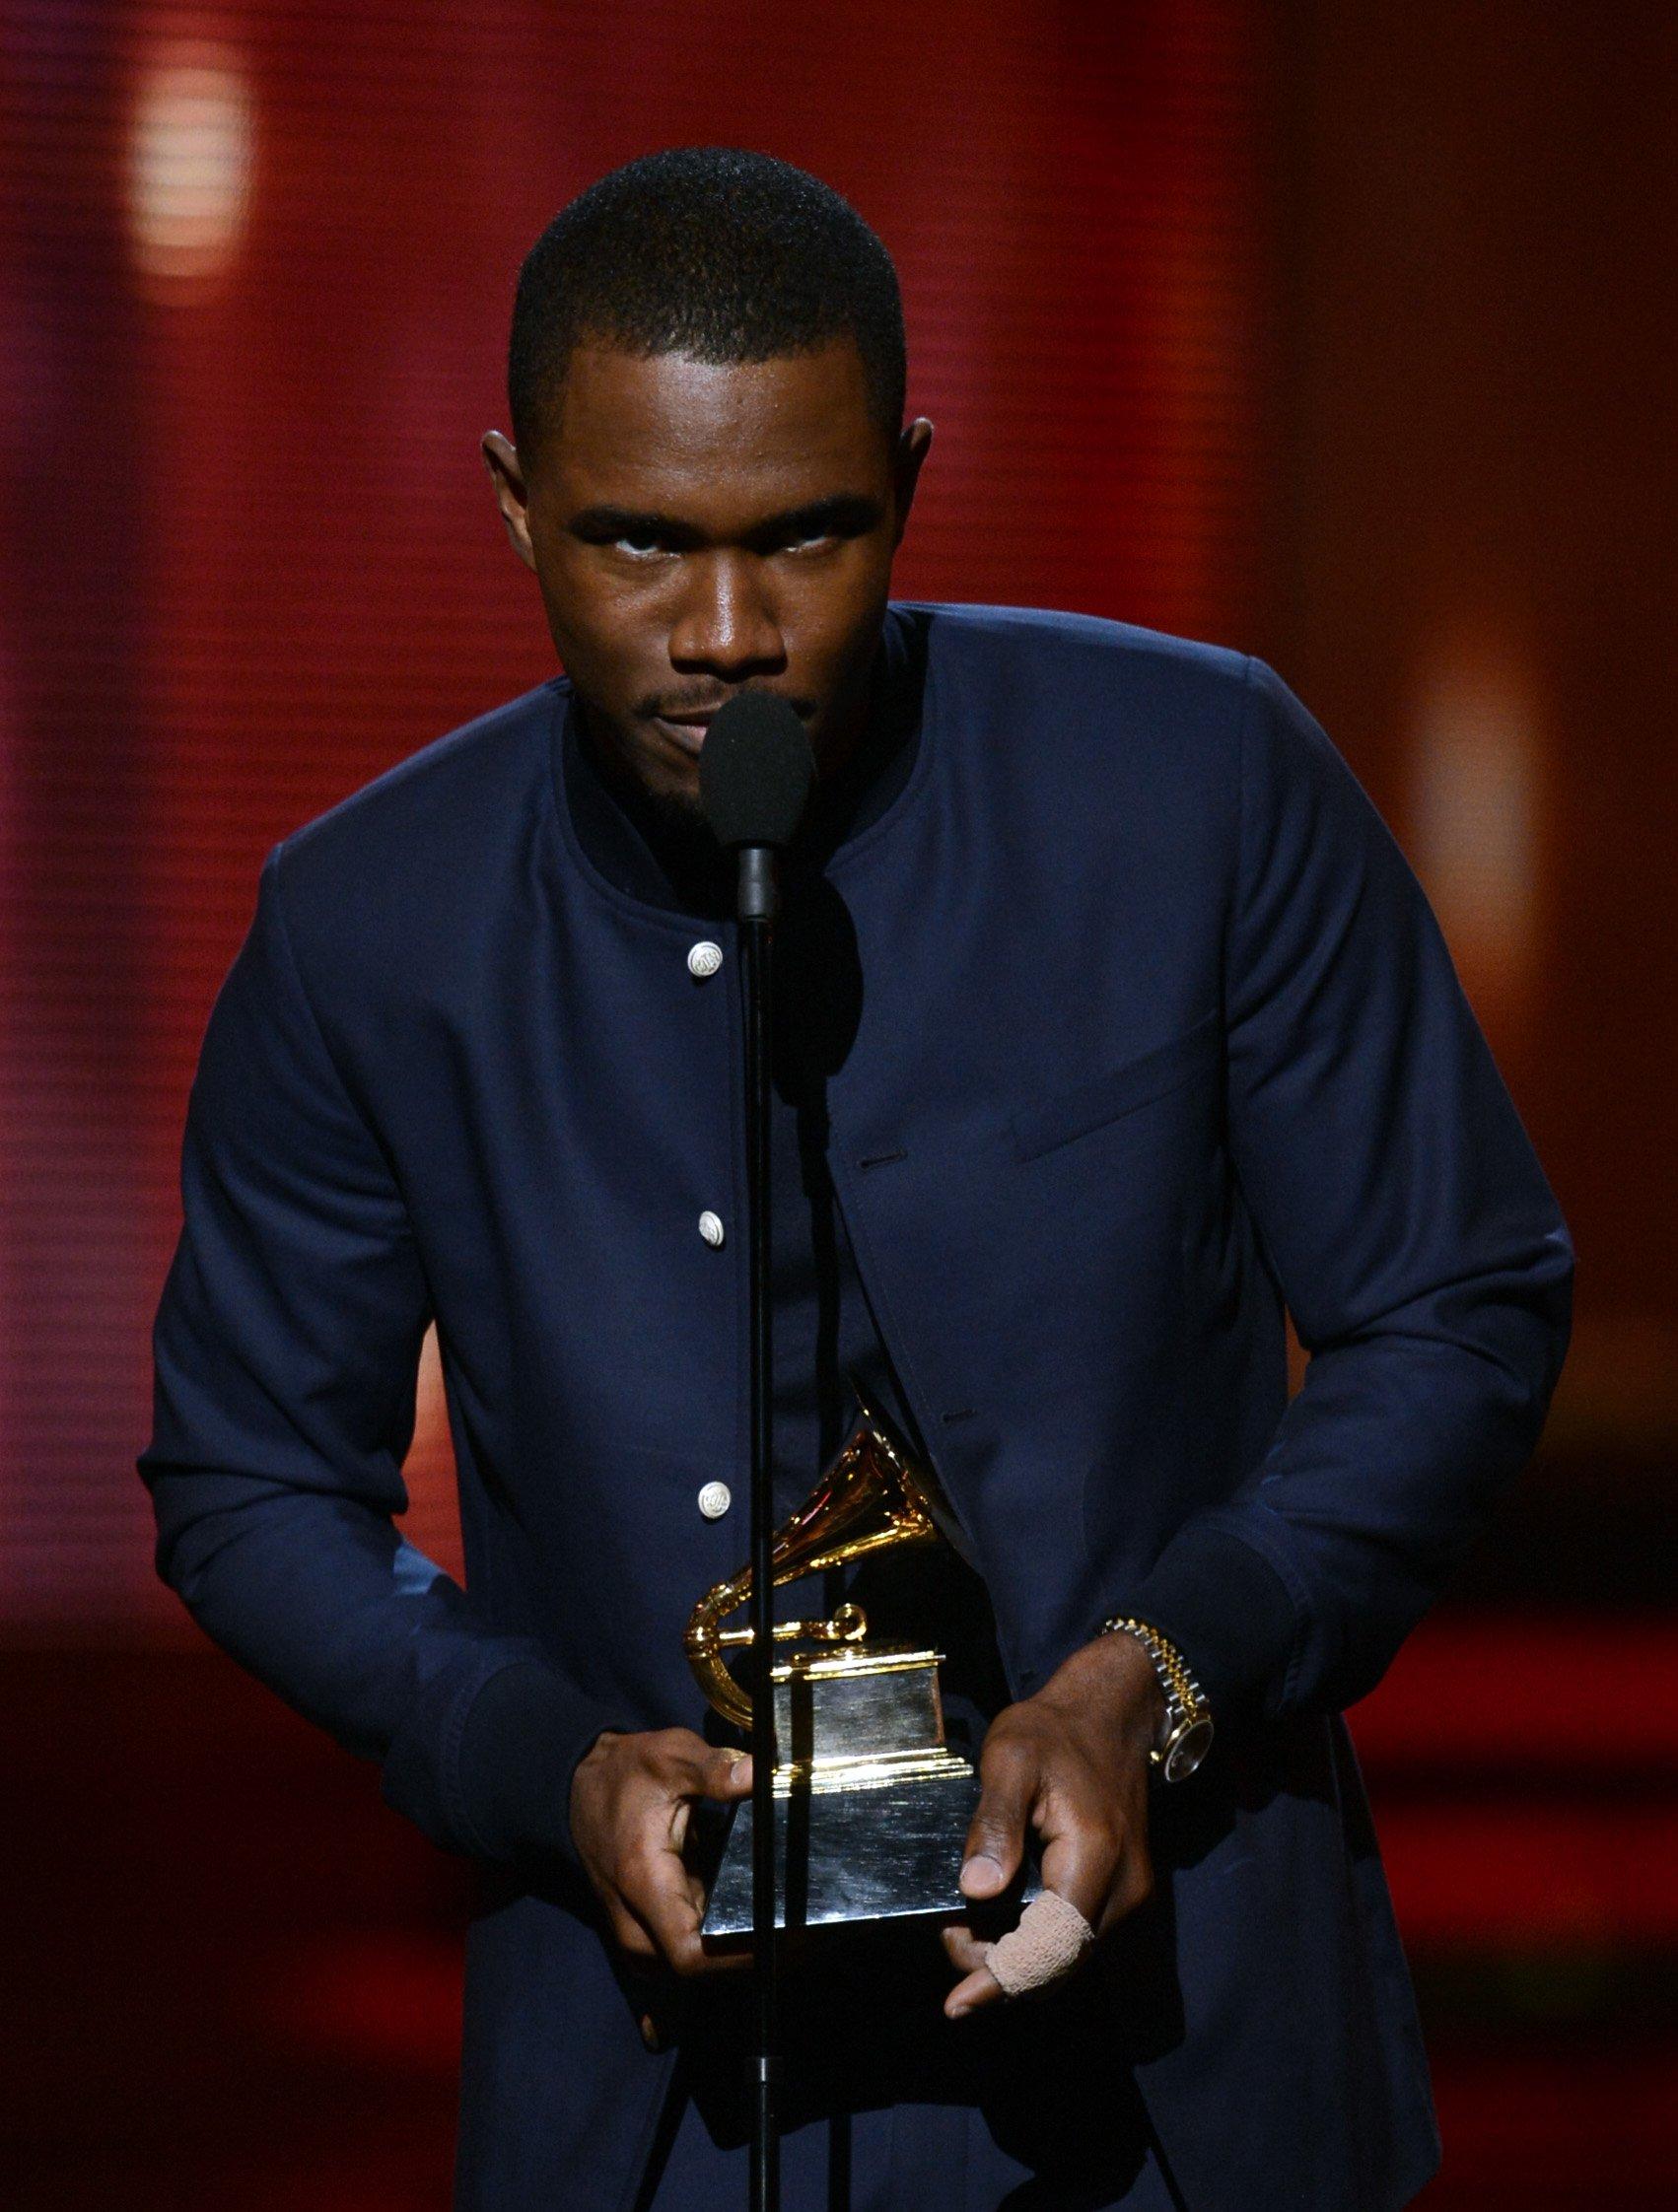 Frank Ocean at the 55th GRAMMY Awards in 2013